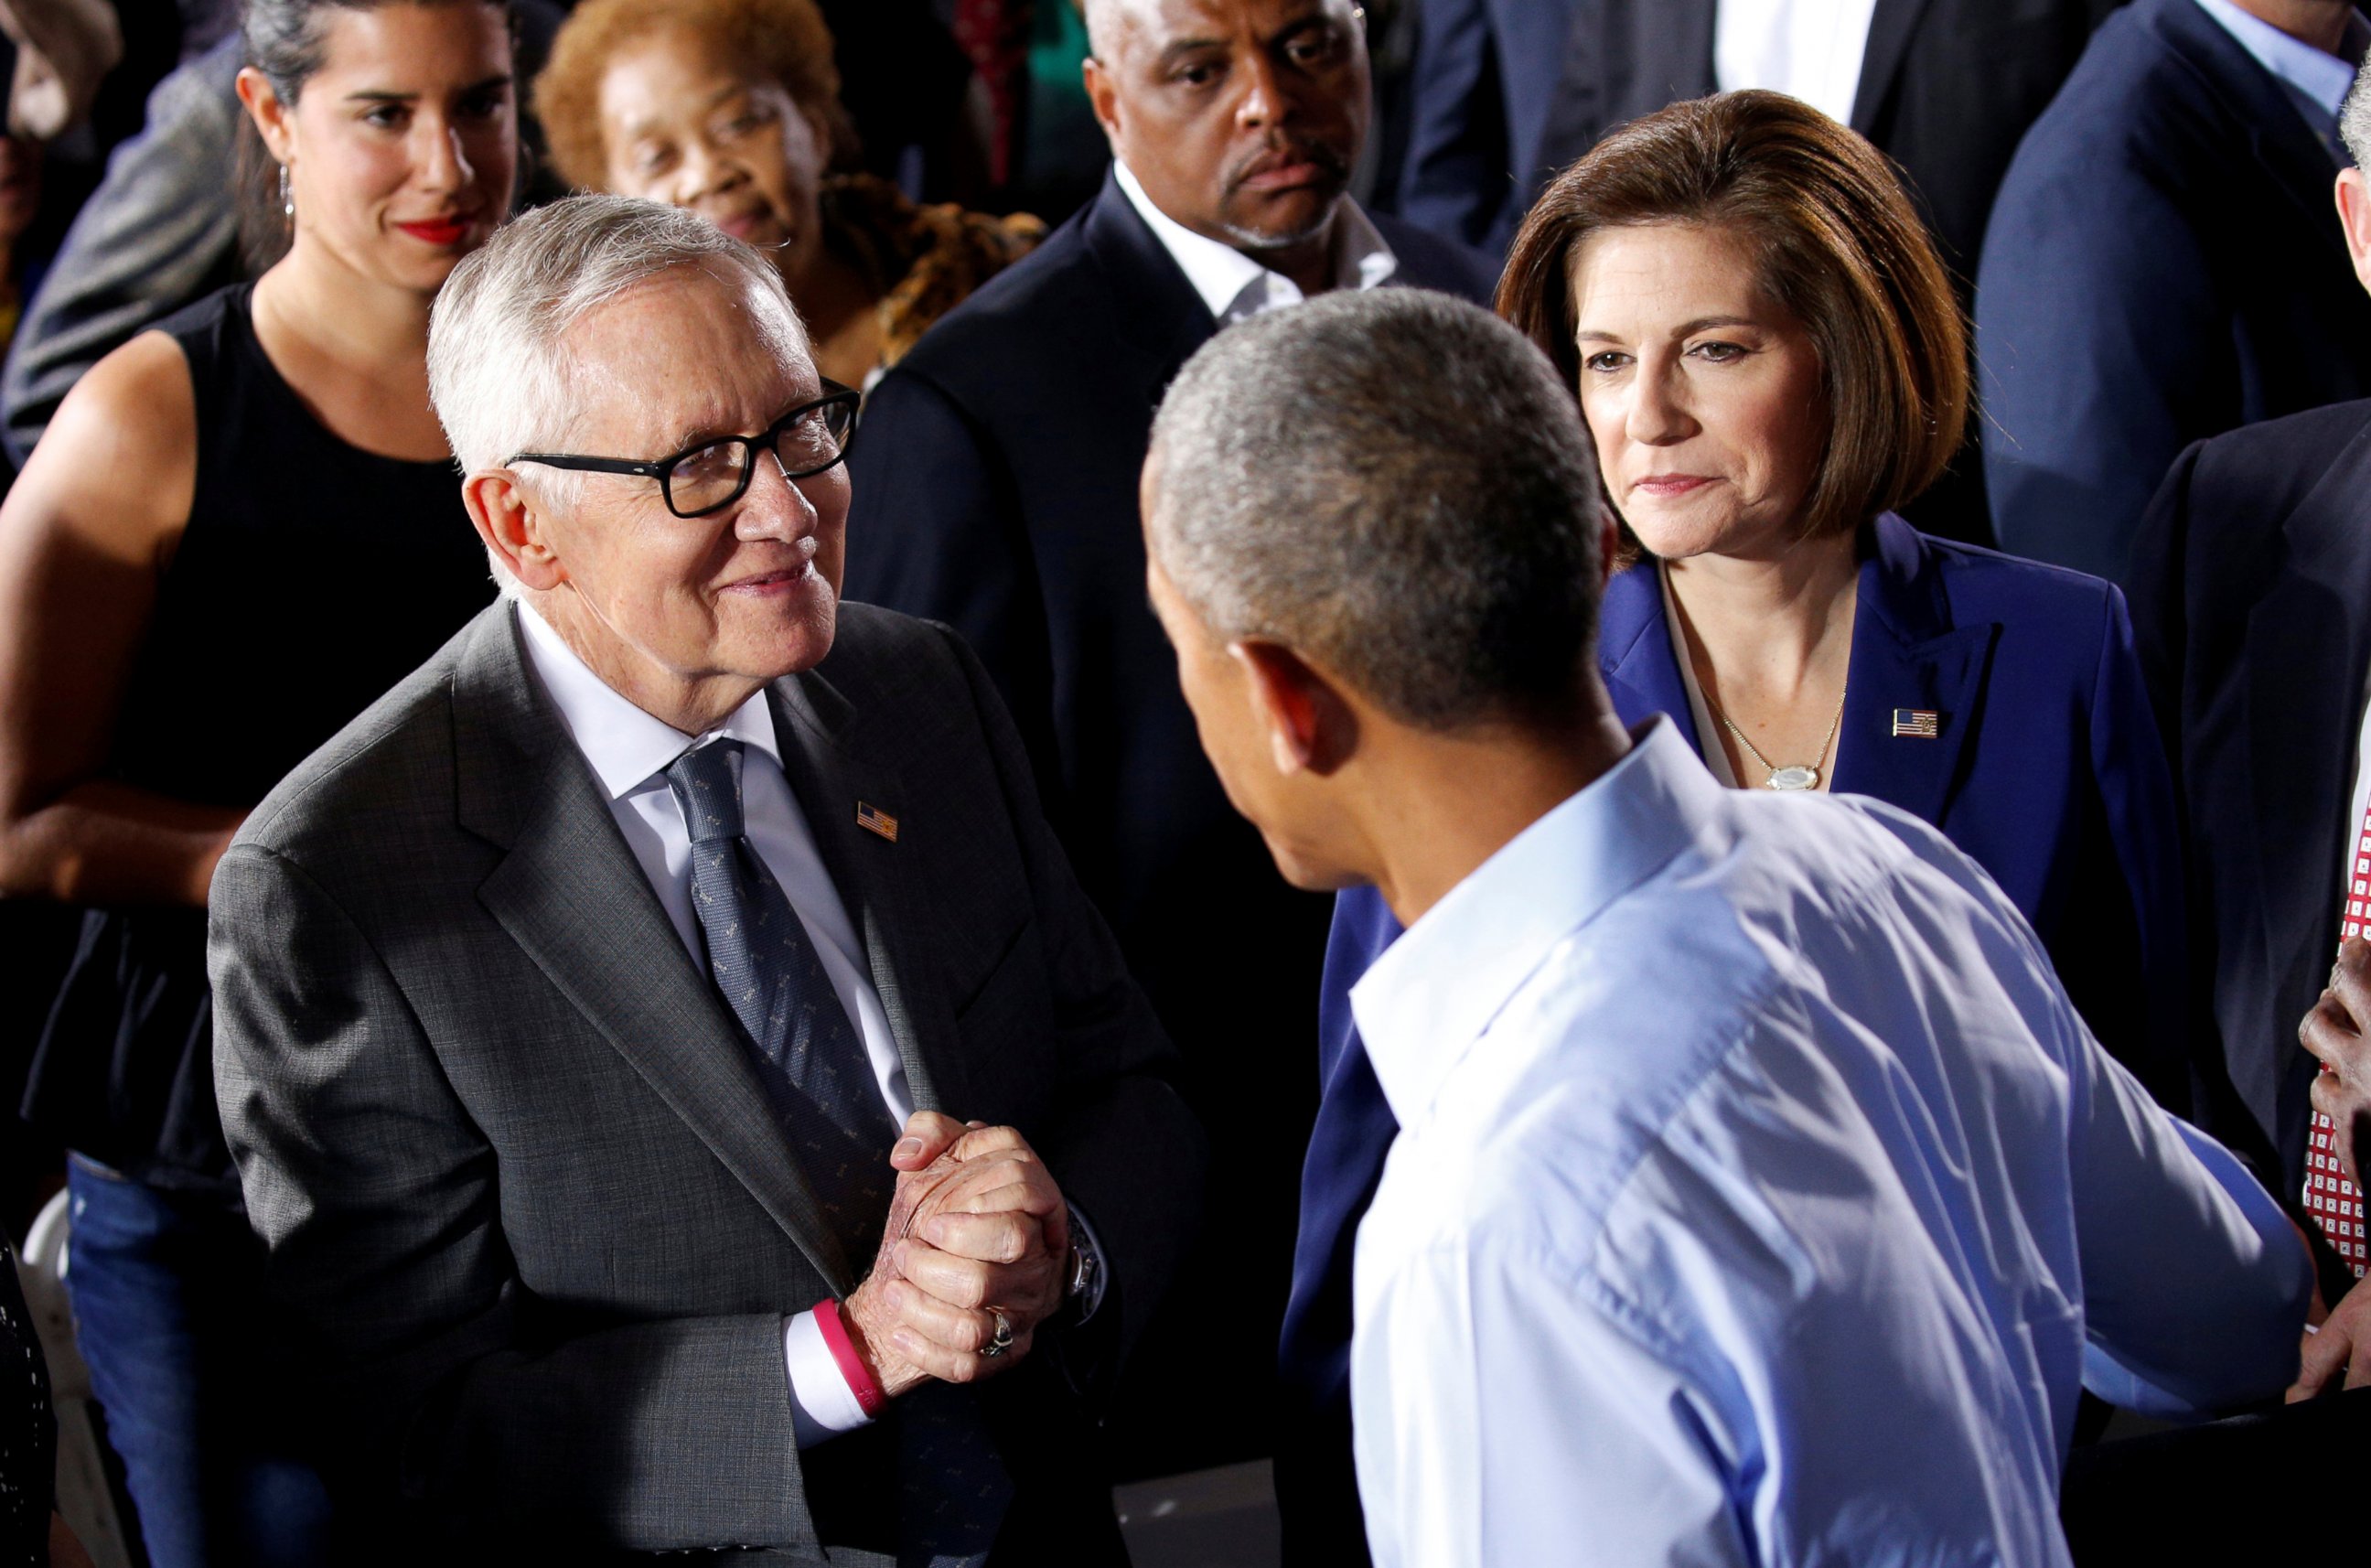 PHOTO: President Barack Obama is greeted by Senate Democratic leader Harry Reid (L) and Senate candidate Catherine Cortez Masto (R) during rally in support of Hillary Clinton's campaign in Las Vegas, Oct. 23, 2016.